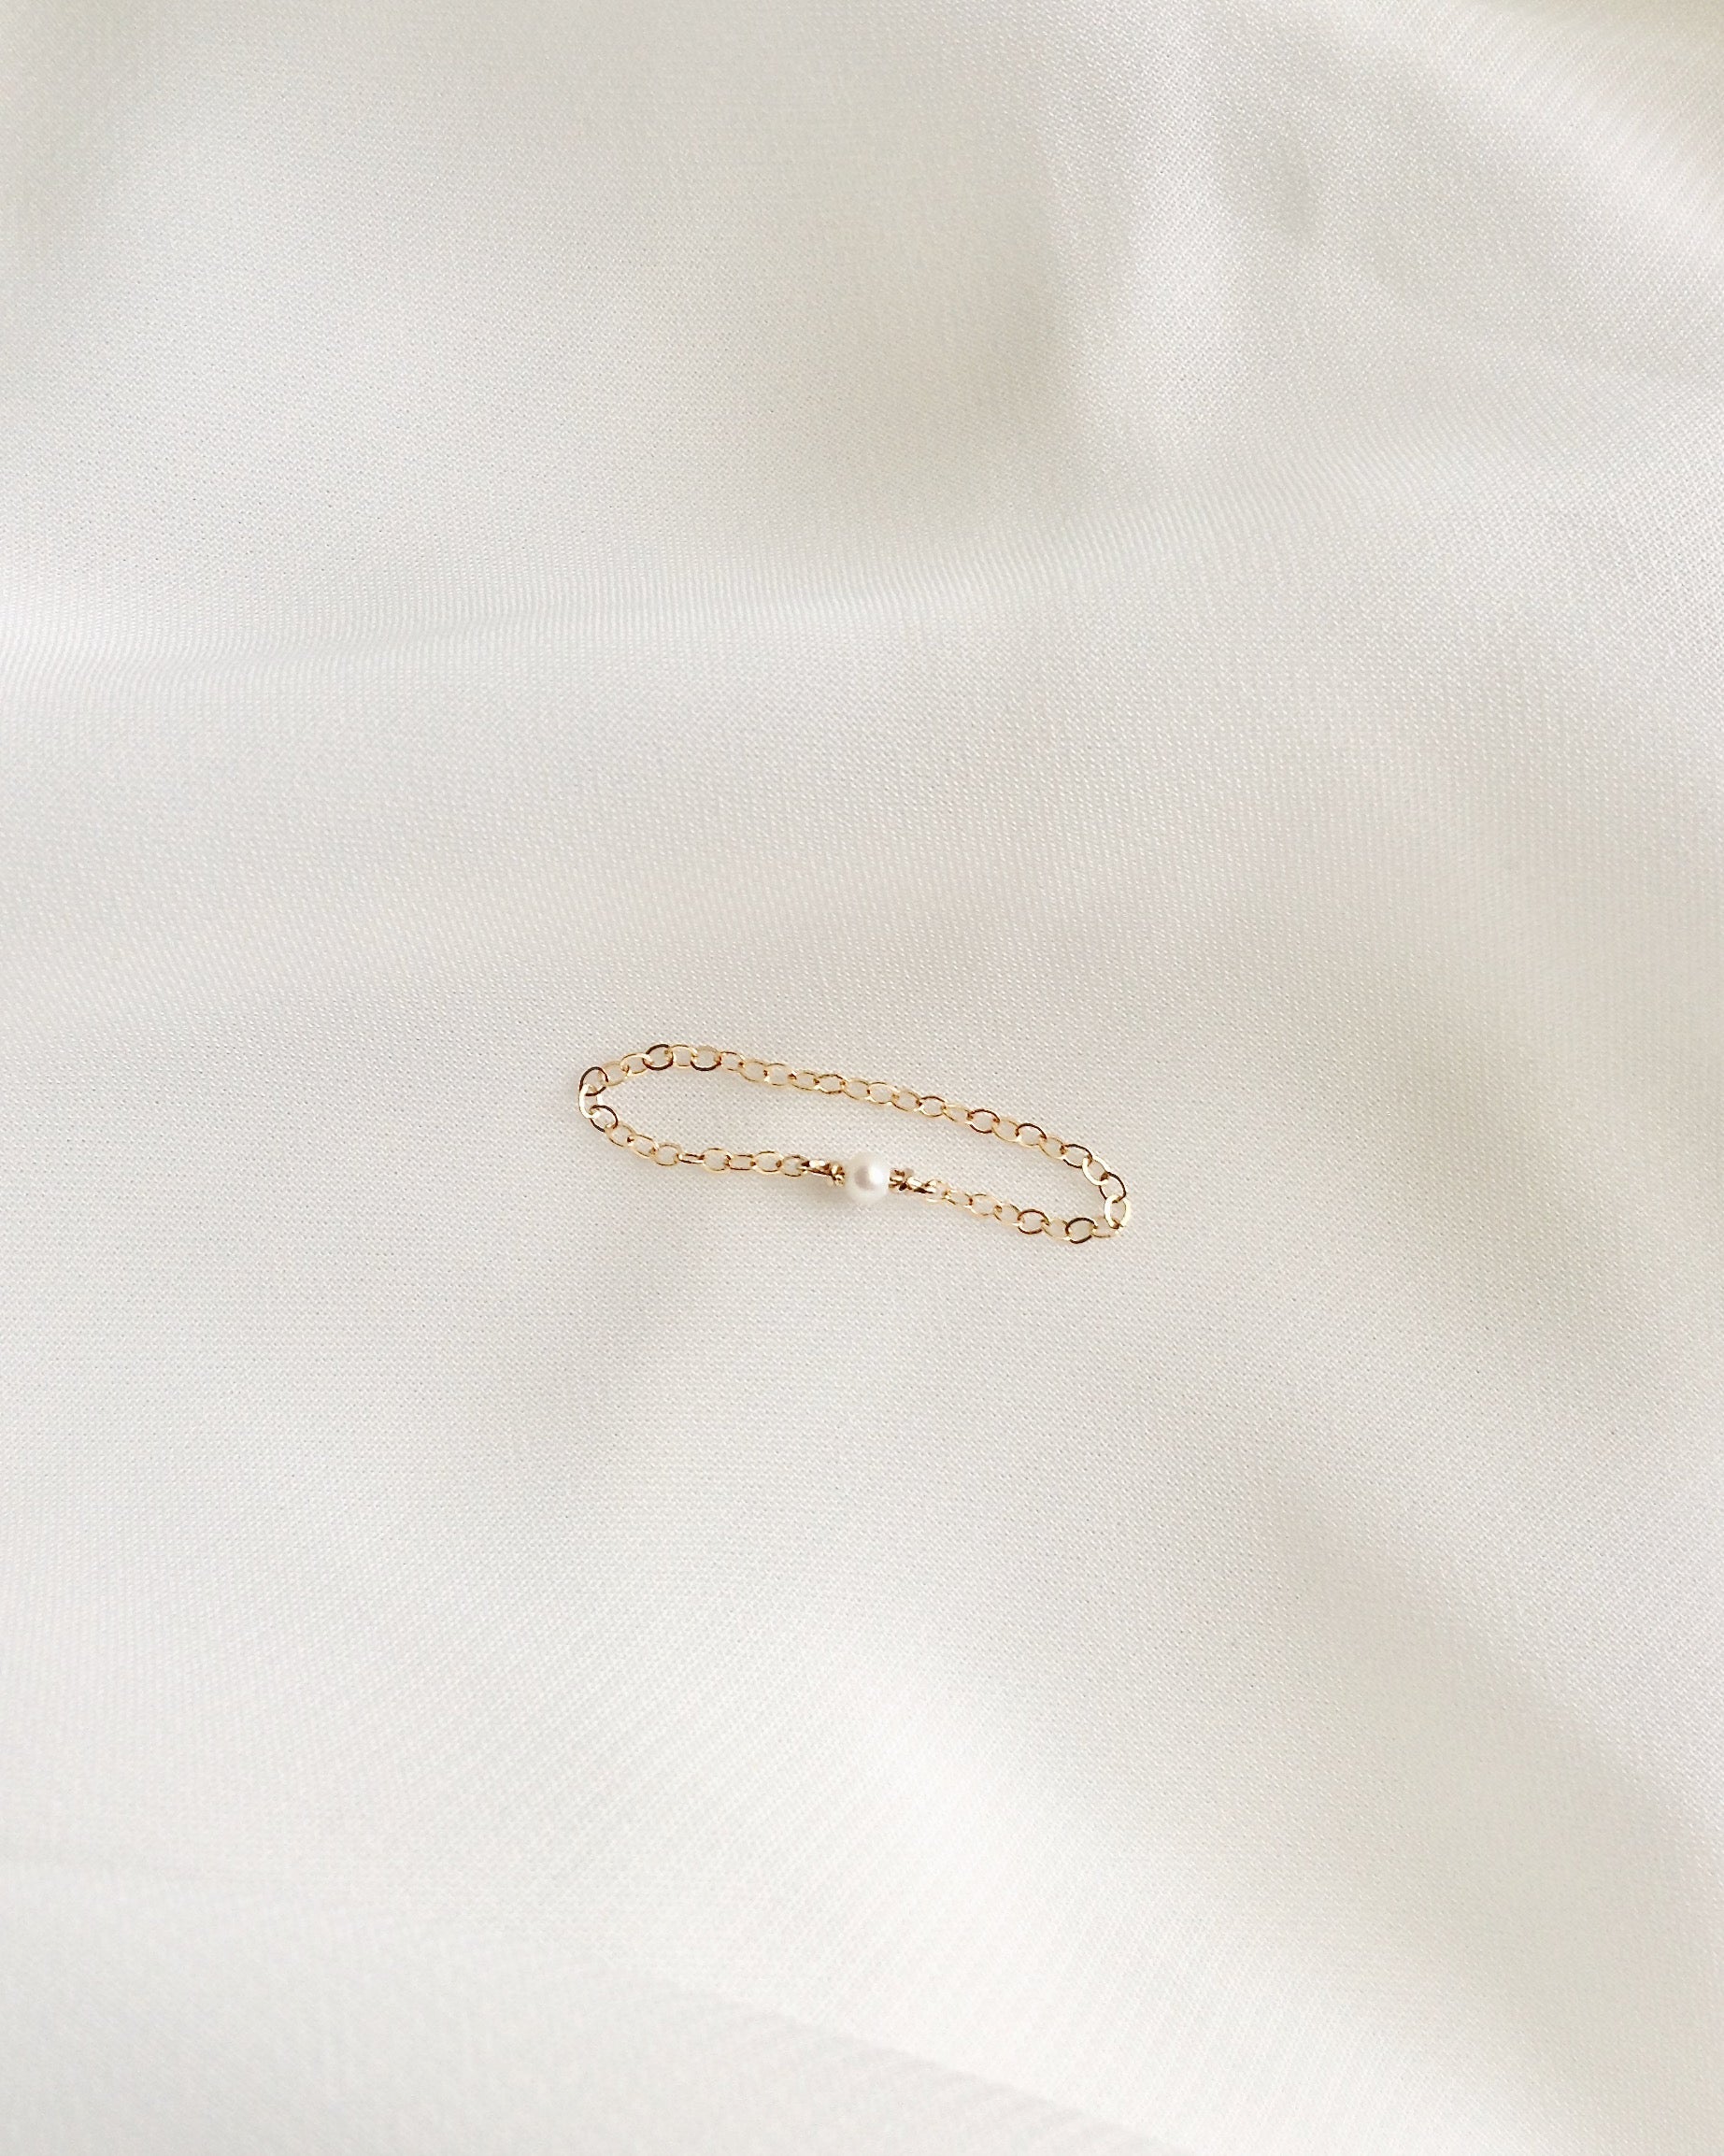 Tiny Freshwater Pearl Ring | Delicate Chain Ring in Gold Filled or Sterling Silver | IB Jewelry